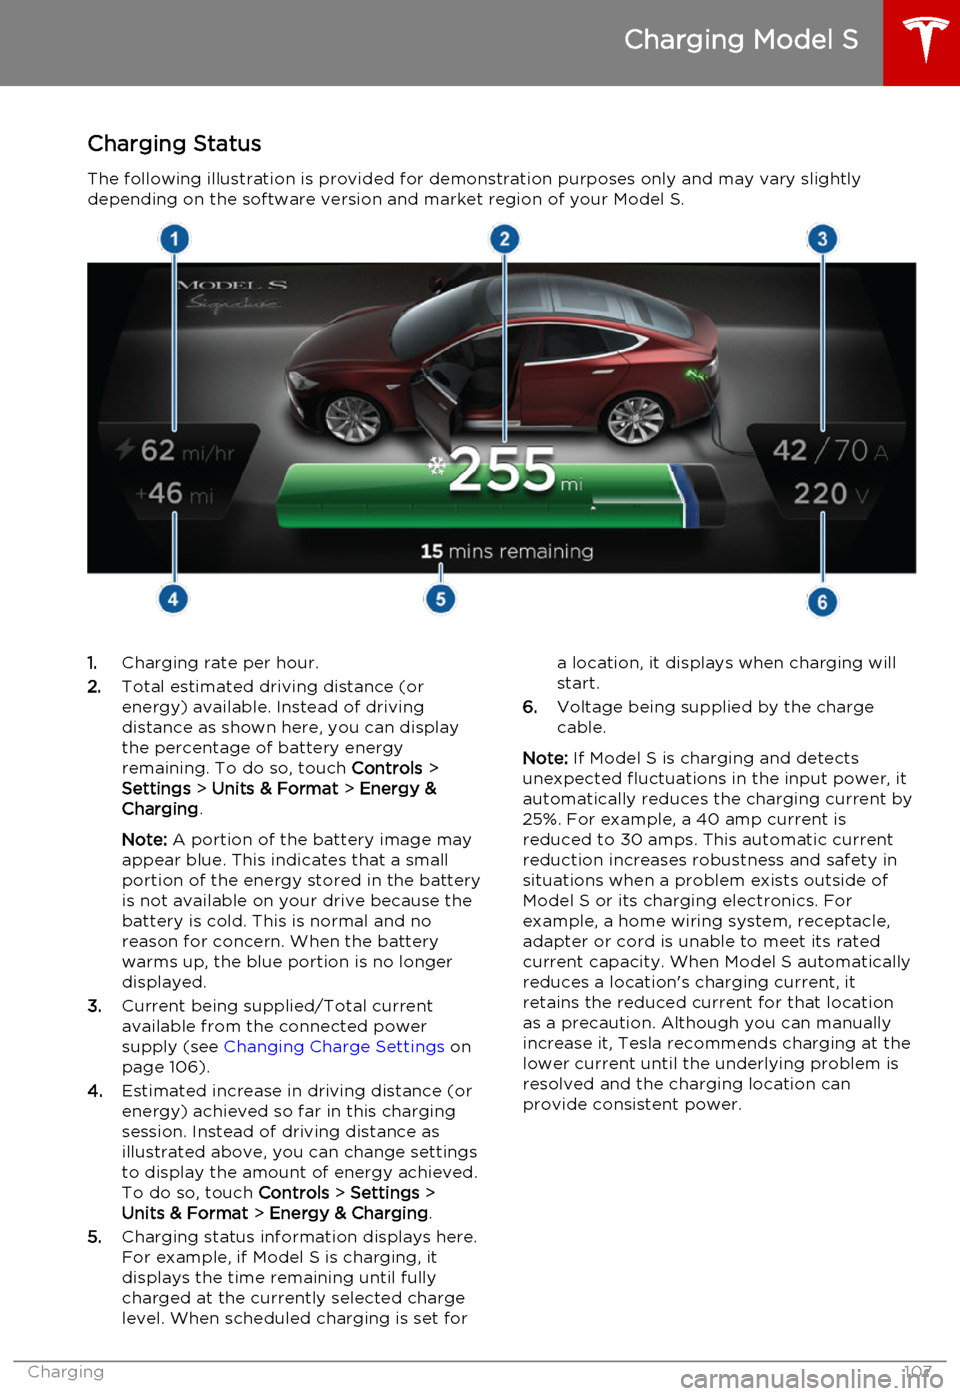 TESLA MODEL S 2015  Owners Manual Charging StatusThe following illustration is provided for demonstration purposes only and may vary slightlydepending on the software version and market region of your Model S.1. Charging rate per hour